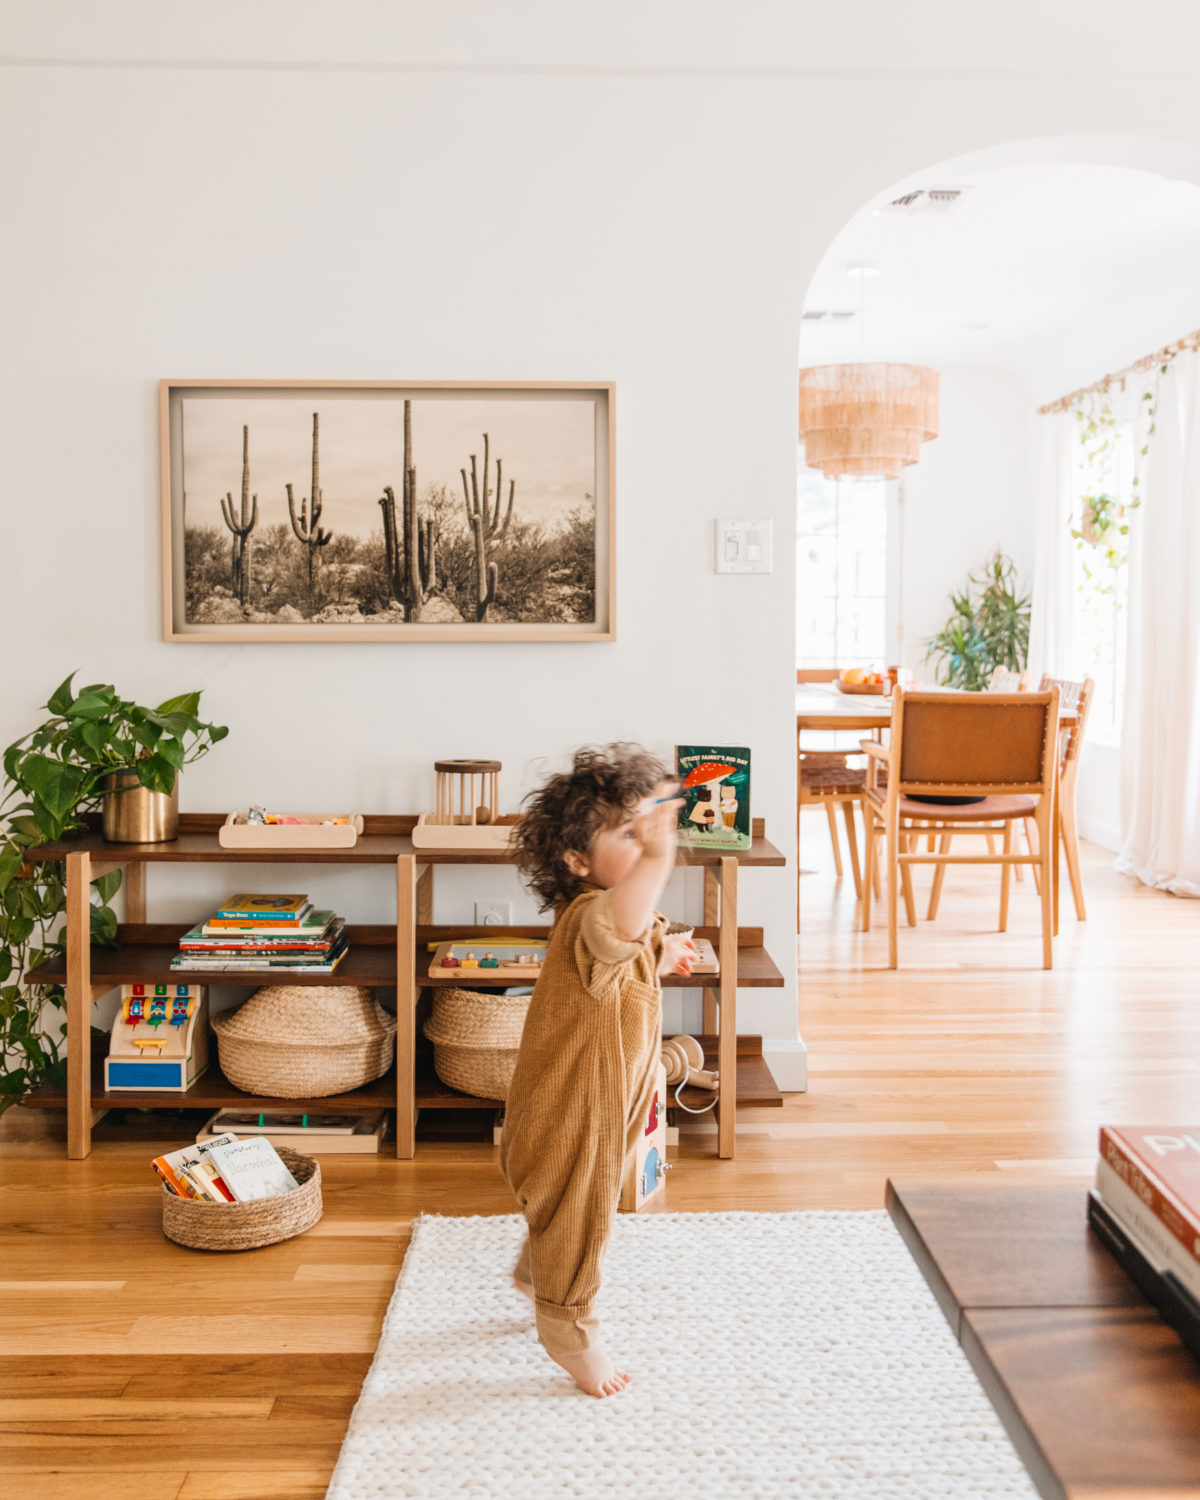 How To Decorate Your Living Room with Kids in Mind: Family Friendly Decor